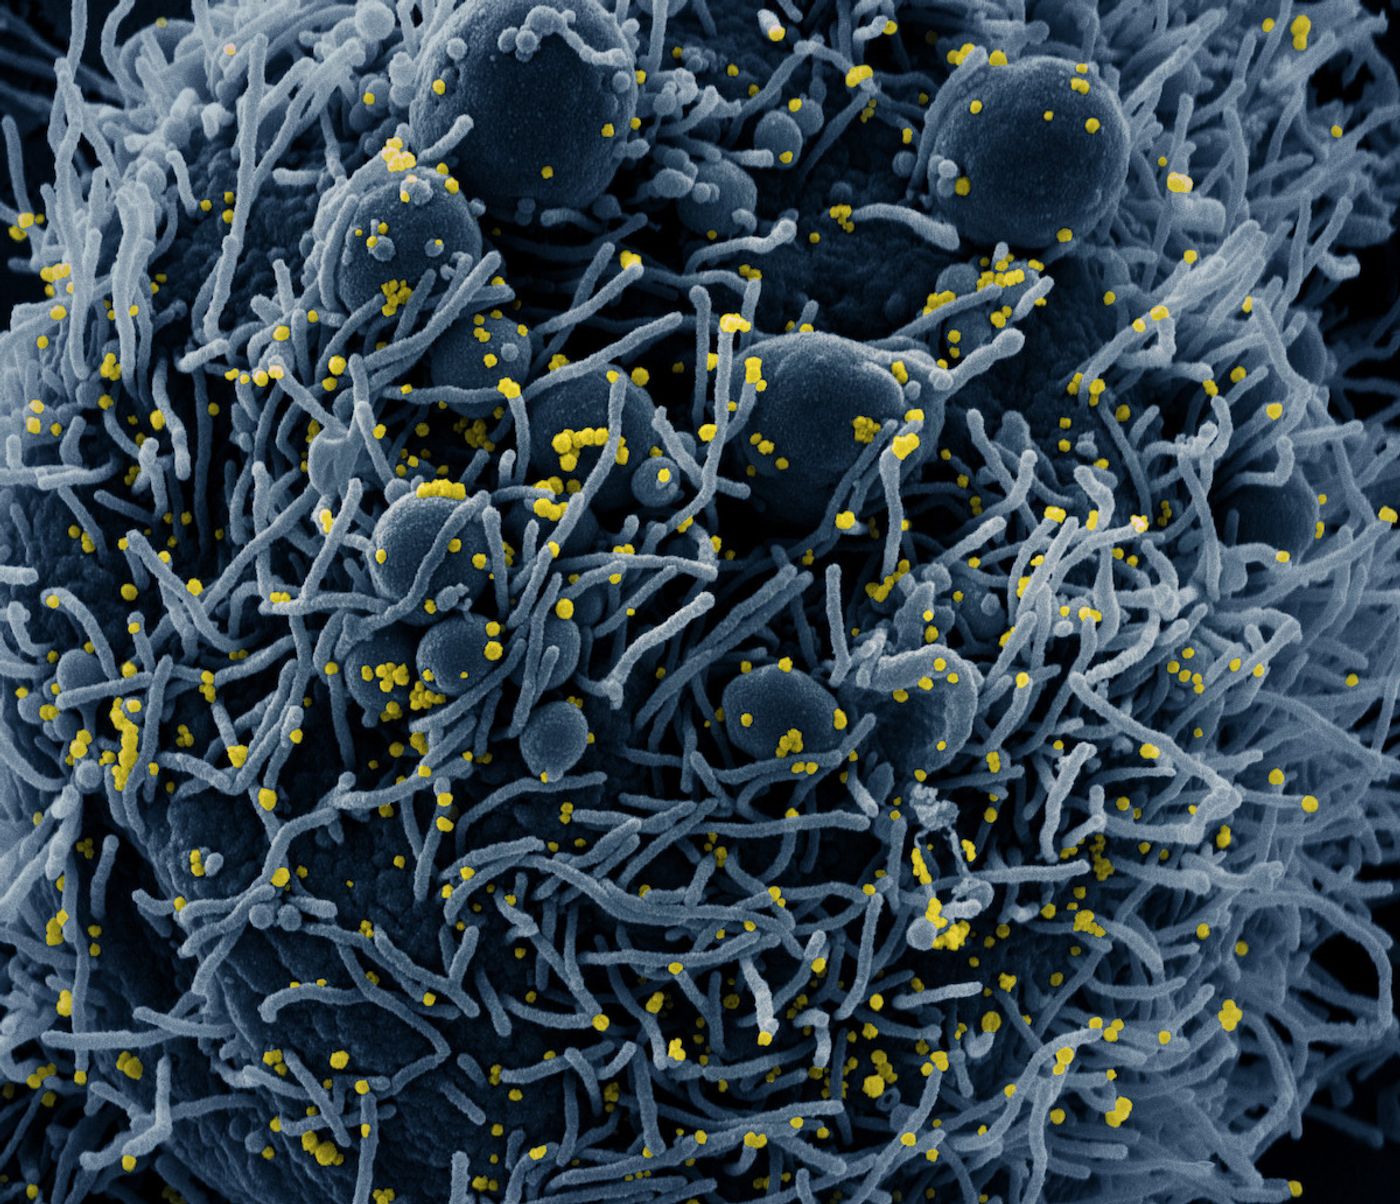 Colorized scanning electron micrograph of an apoptotic cell (blue) infected with SARS-COV-2 virus particles (yellow), isolated from a patient sample. Image captured at the NIAID Integrated Research Facility (IRF) in Fort Detrick, Maryland. Credit: NIAID